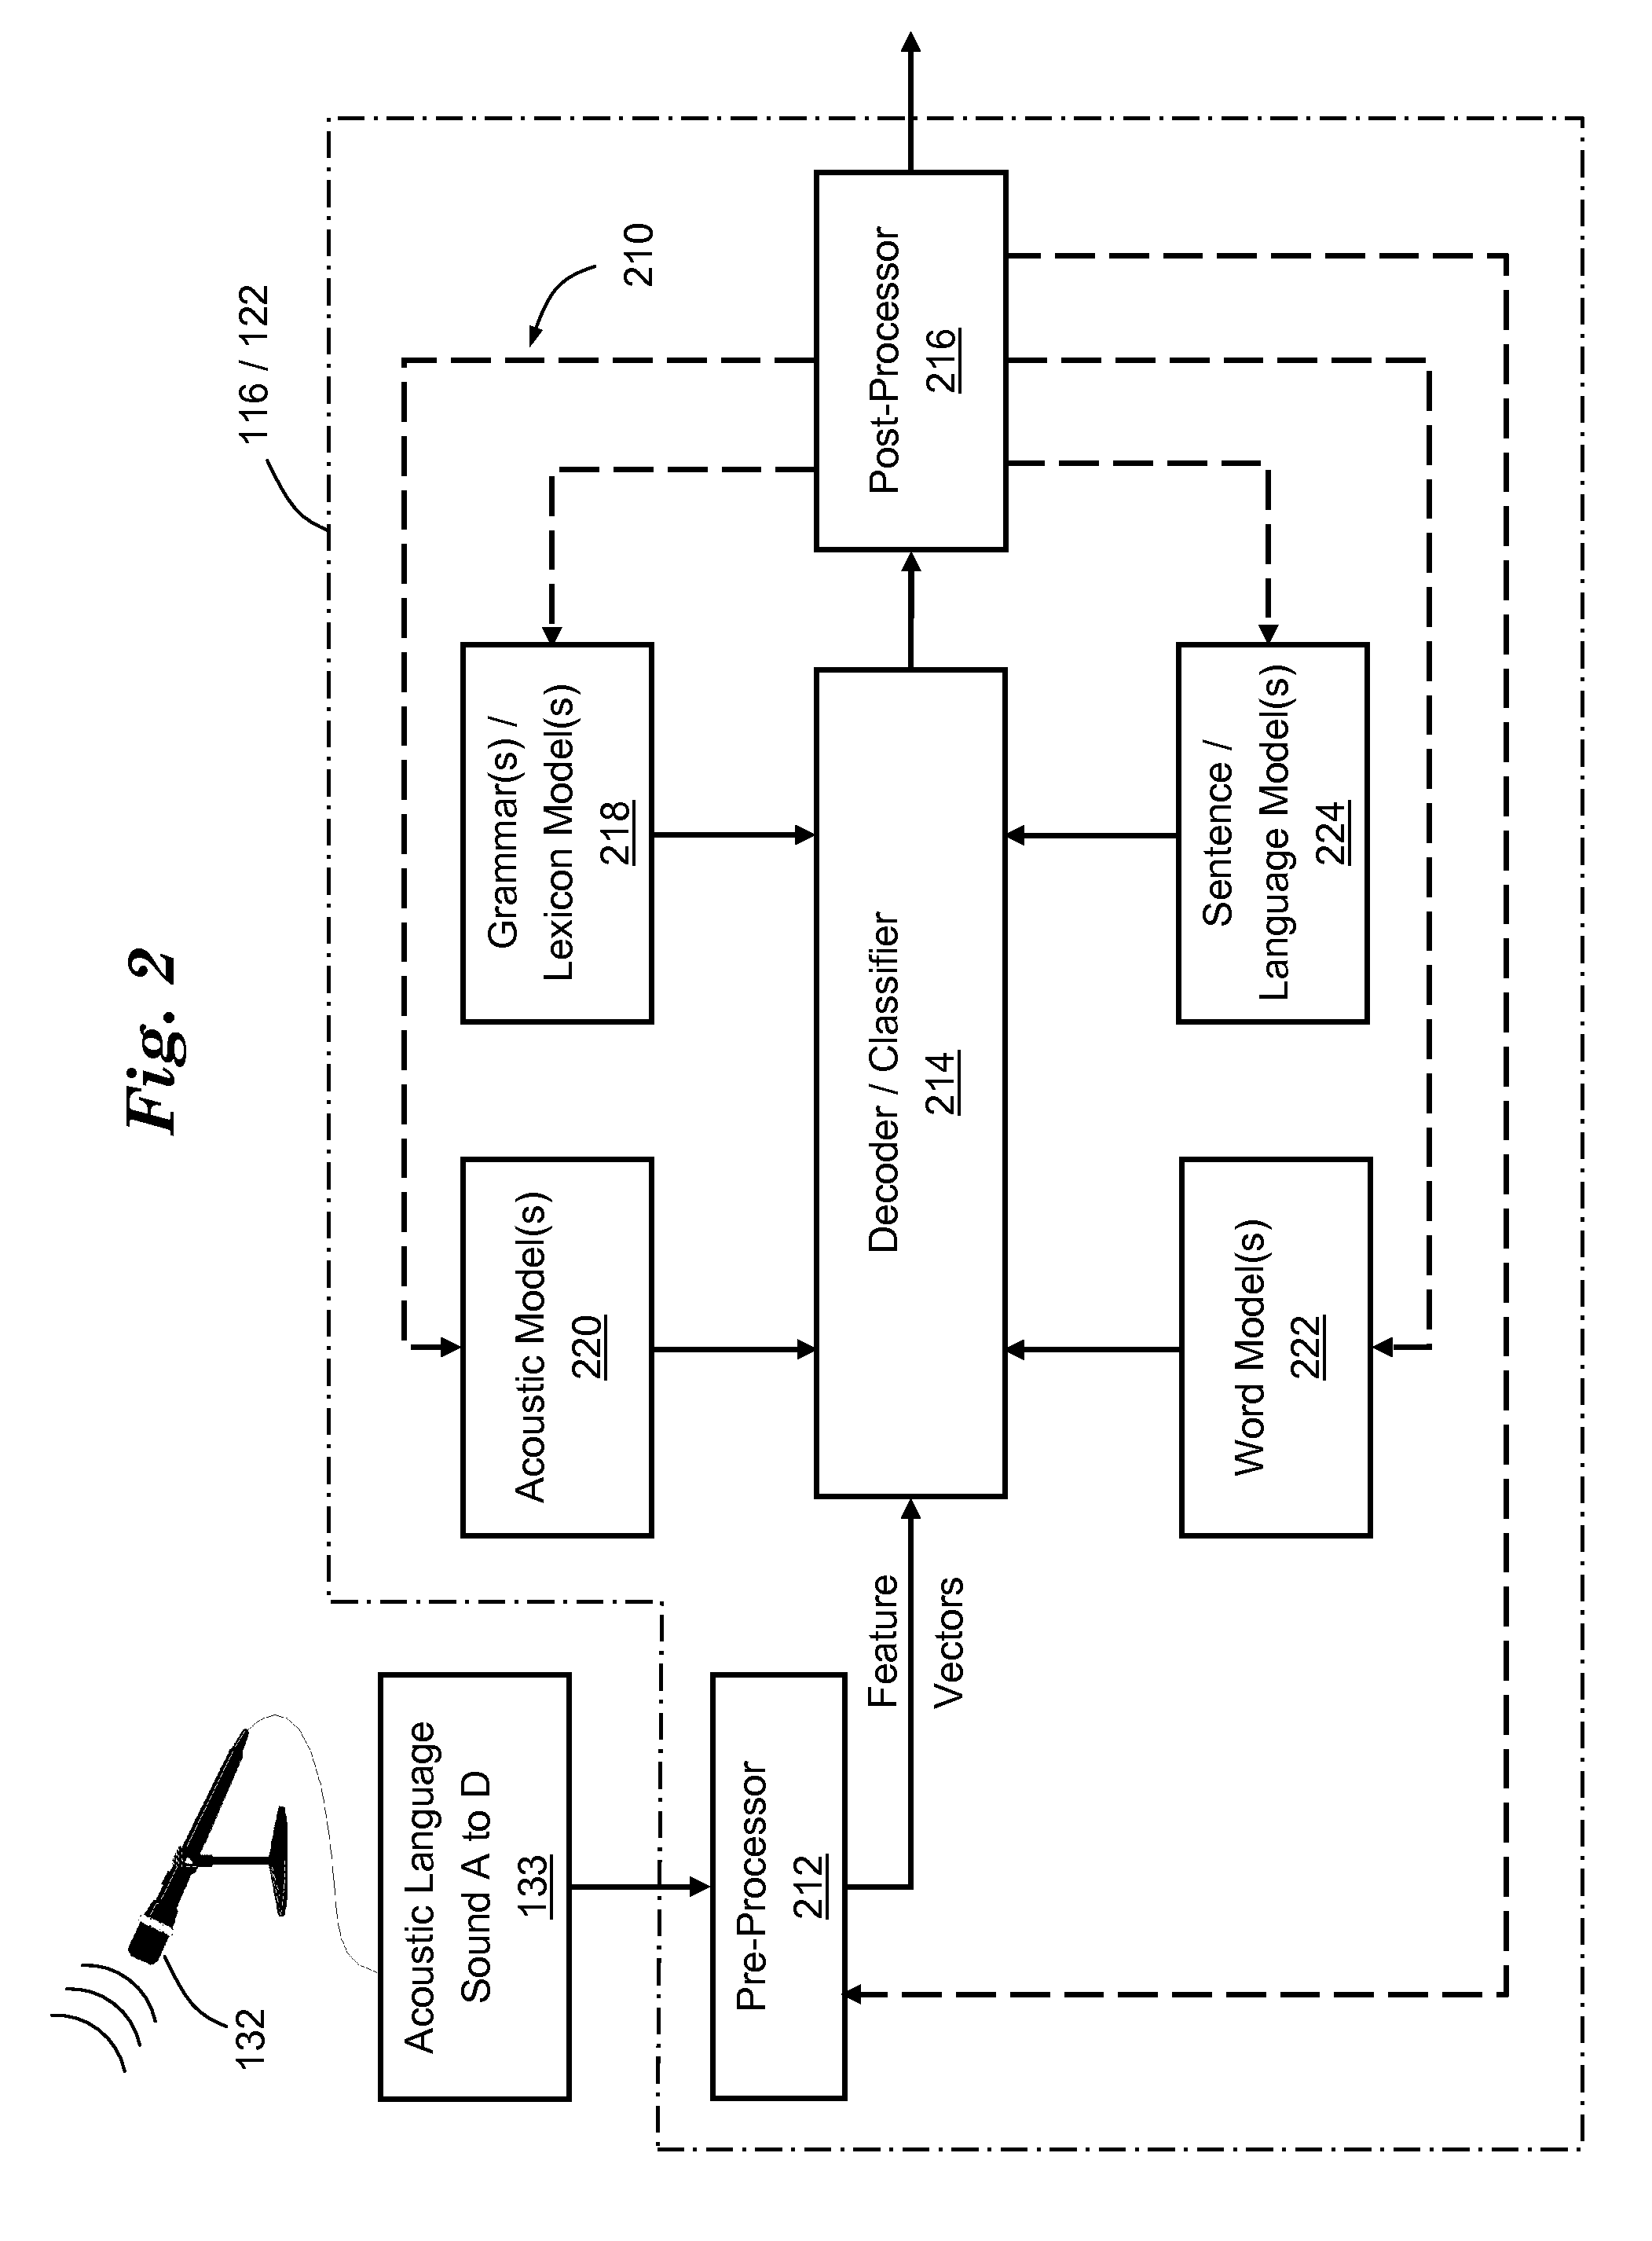 Applying speech recognition adaptation in an automated speech recognition system of a telematics-equipped vehicle